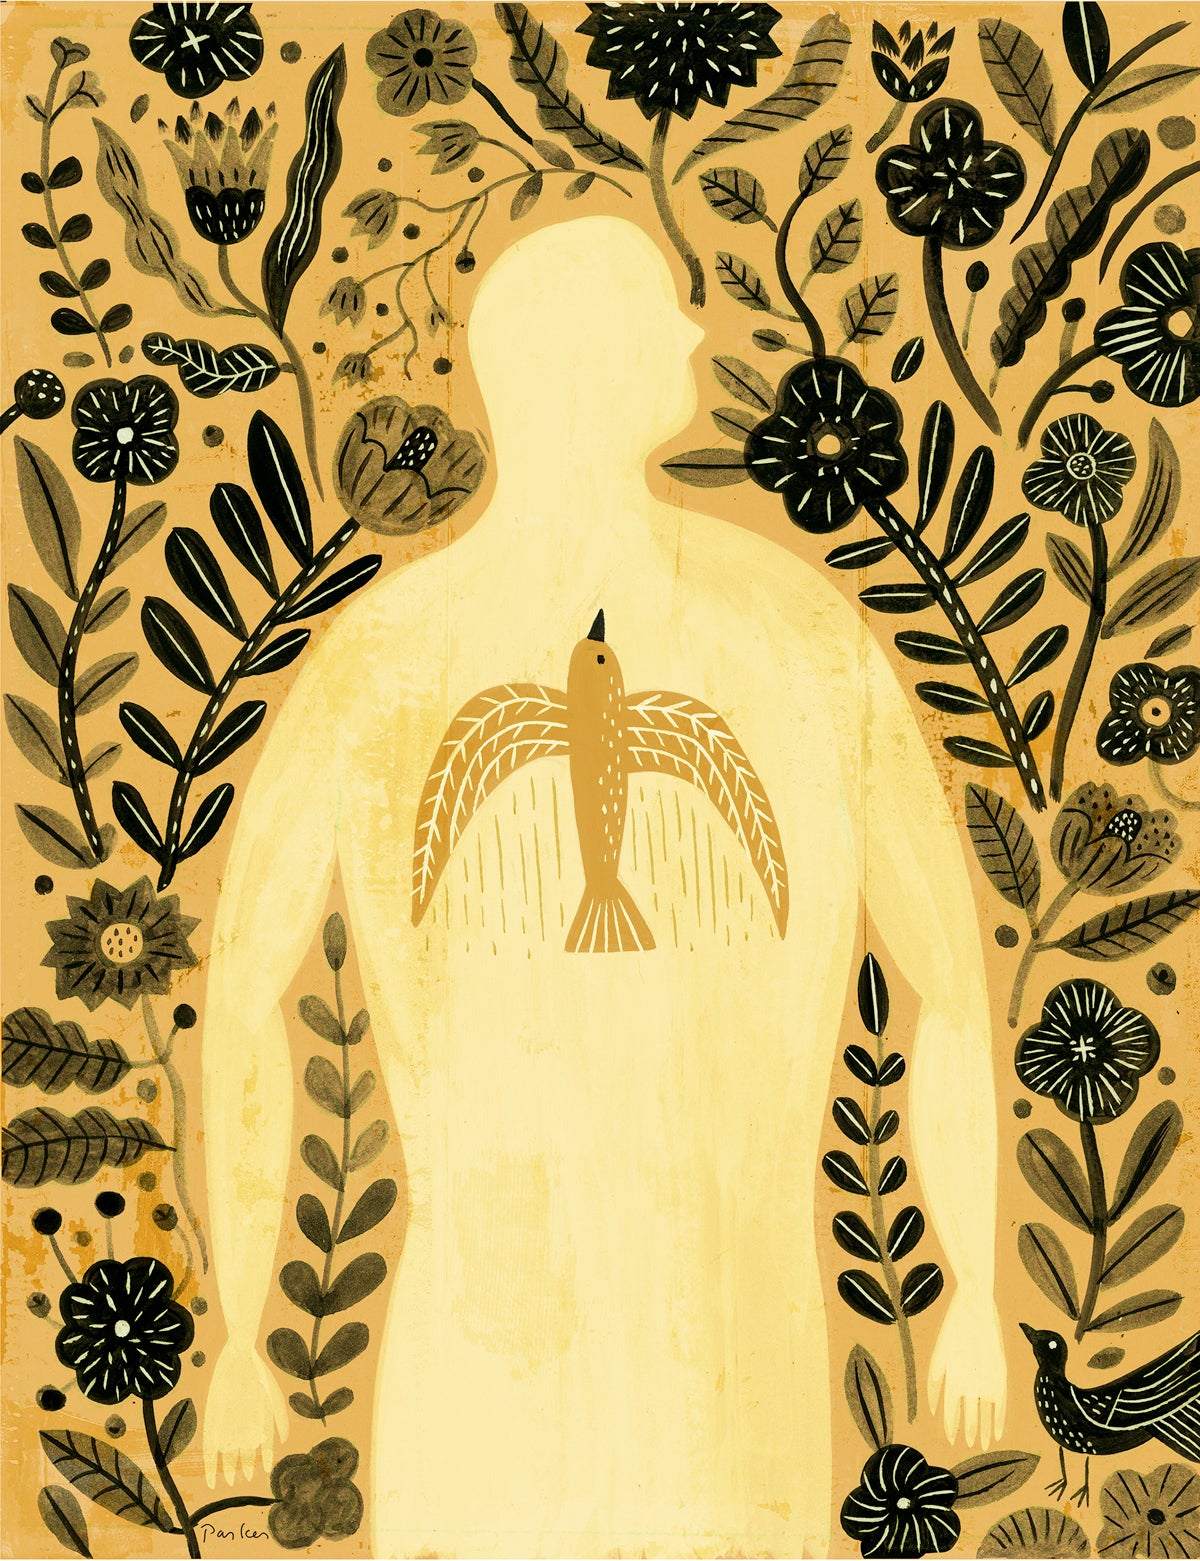 Illustration of man with bird for lungs